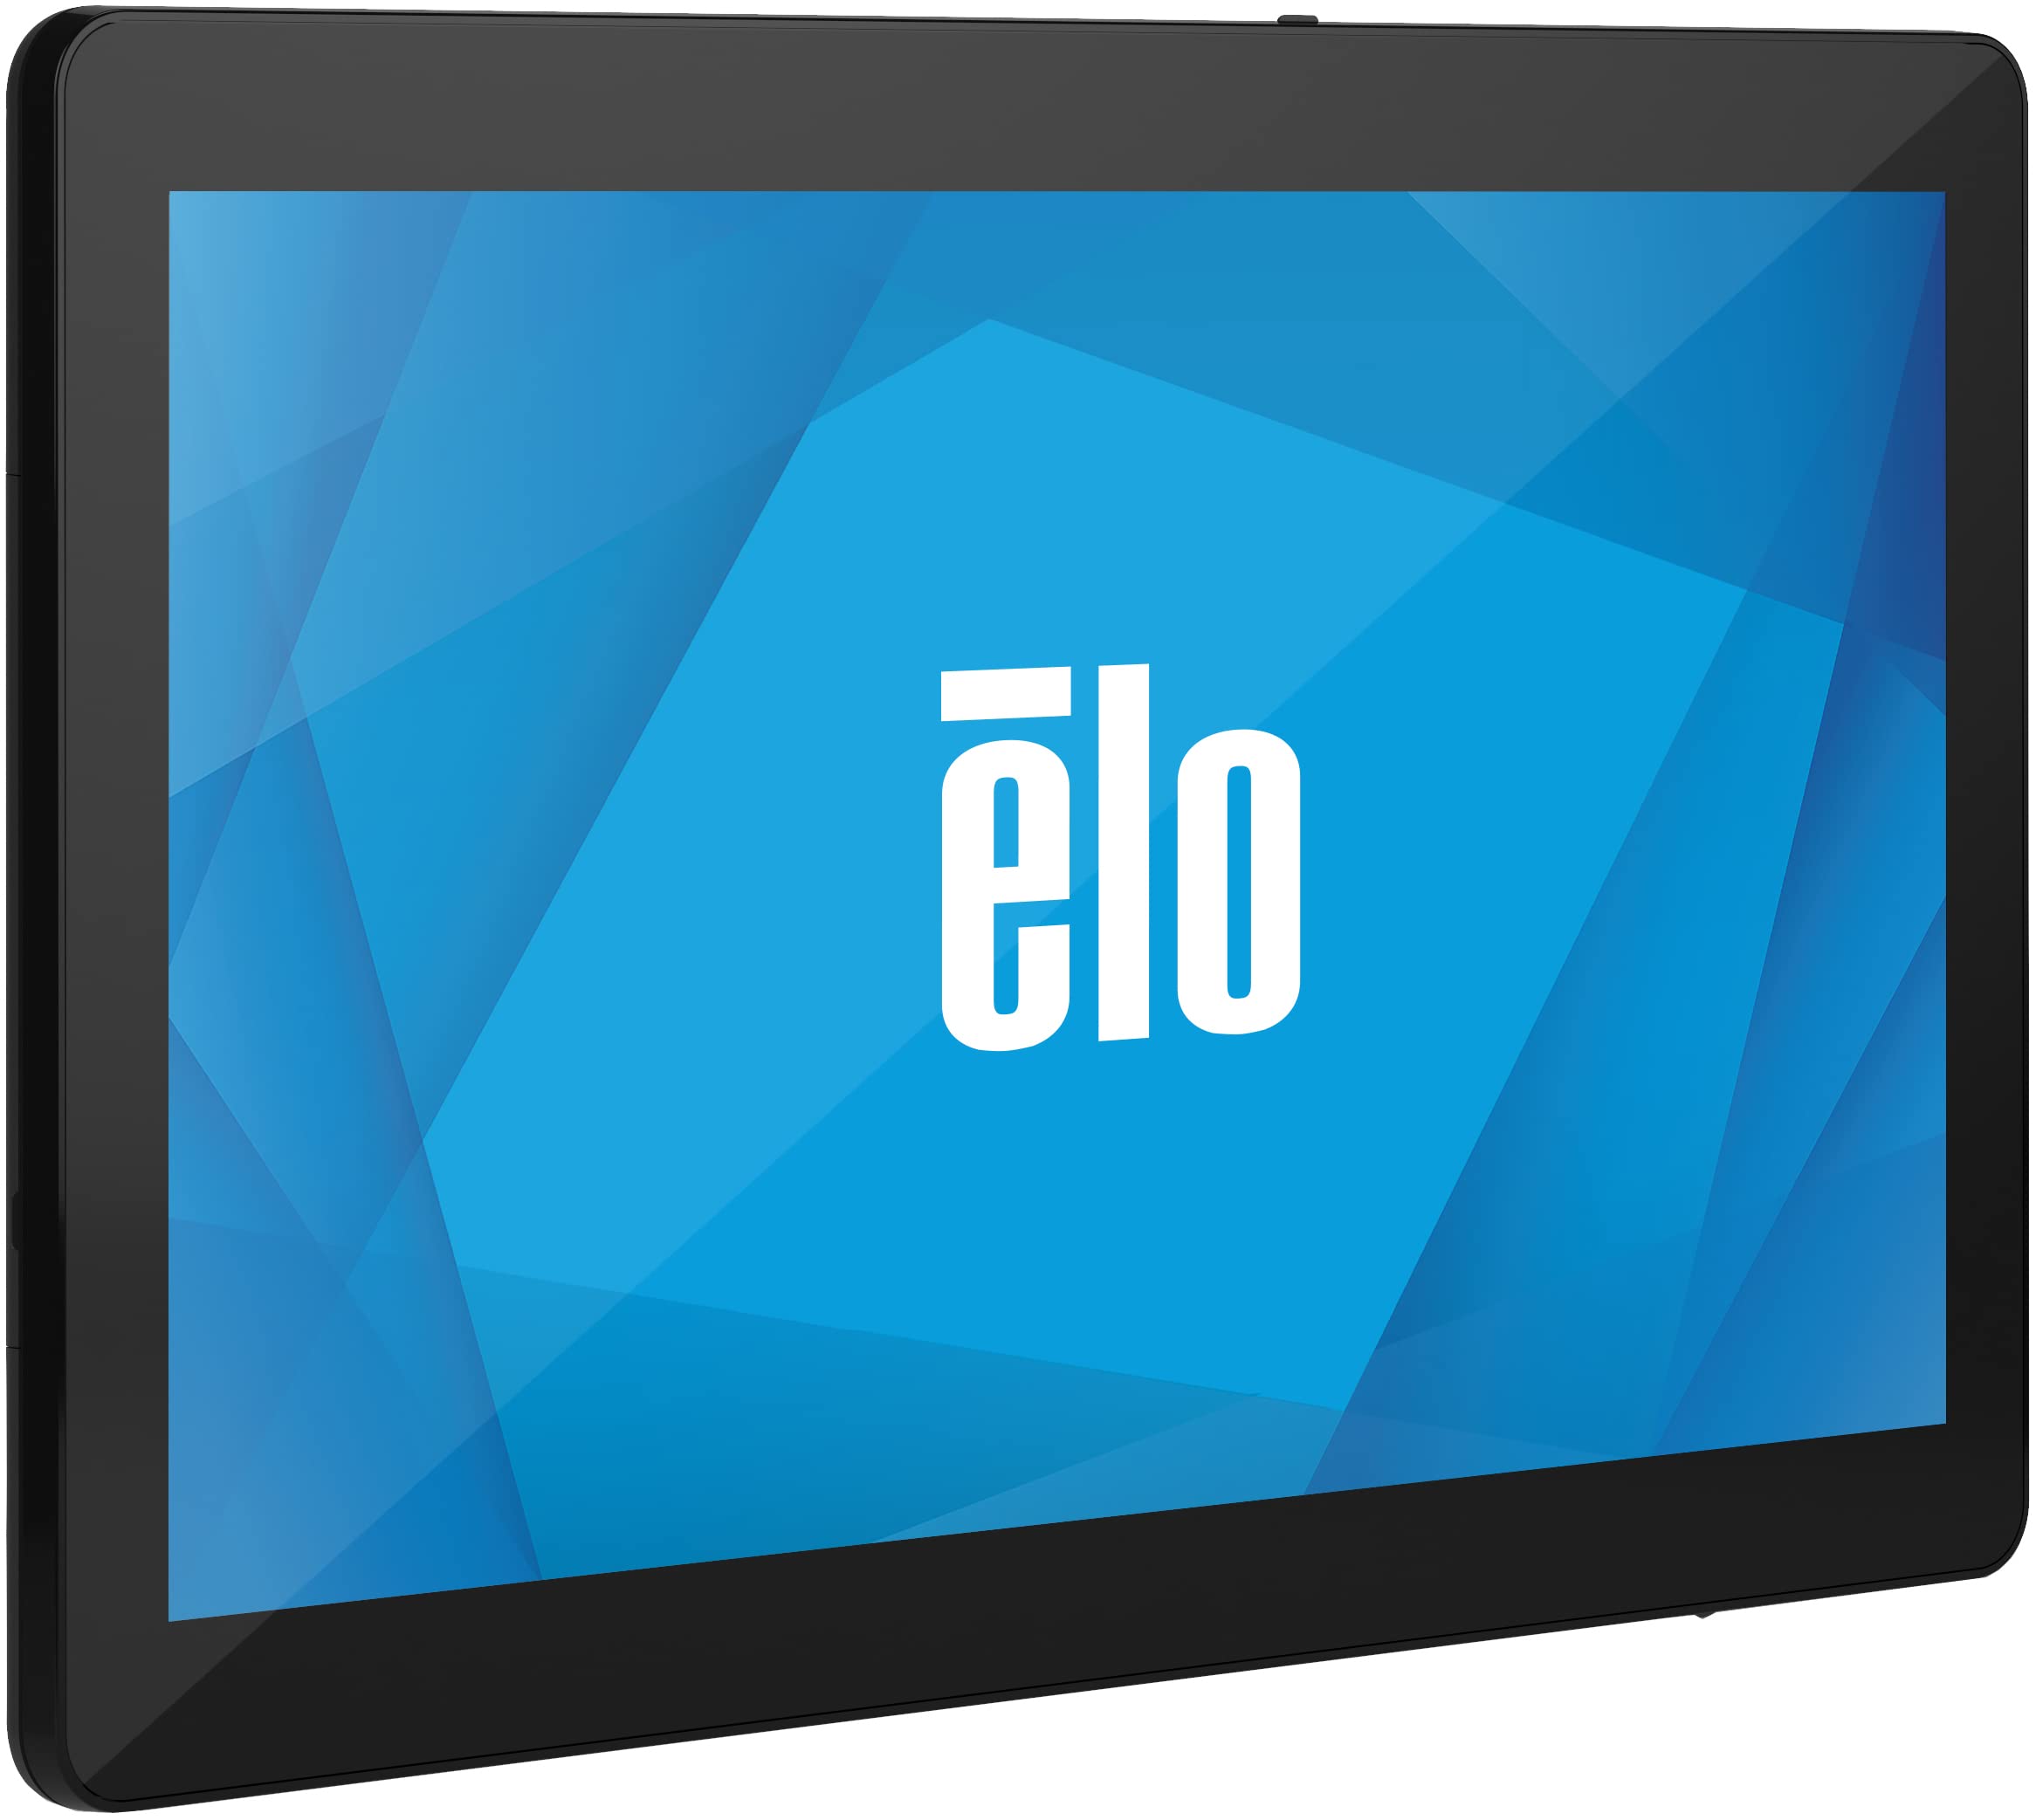 Elo EloPOS 15" Point of Sale System, 15-inch Touchscreen with i5, Win 10, 8GB RAM, 128GB SSD, and Stand with Connection Hub